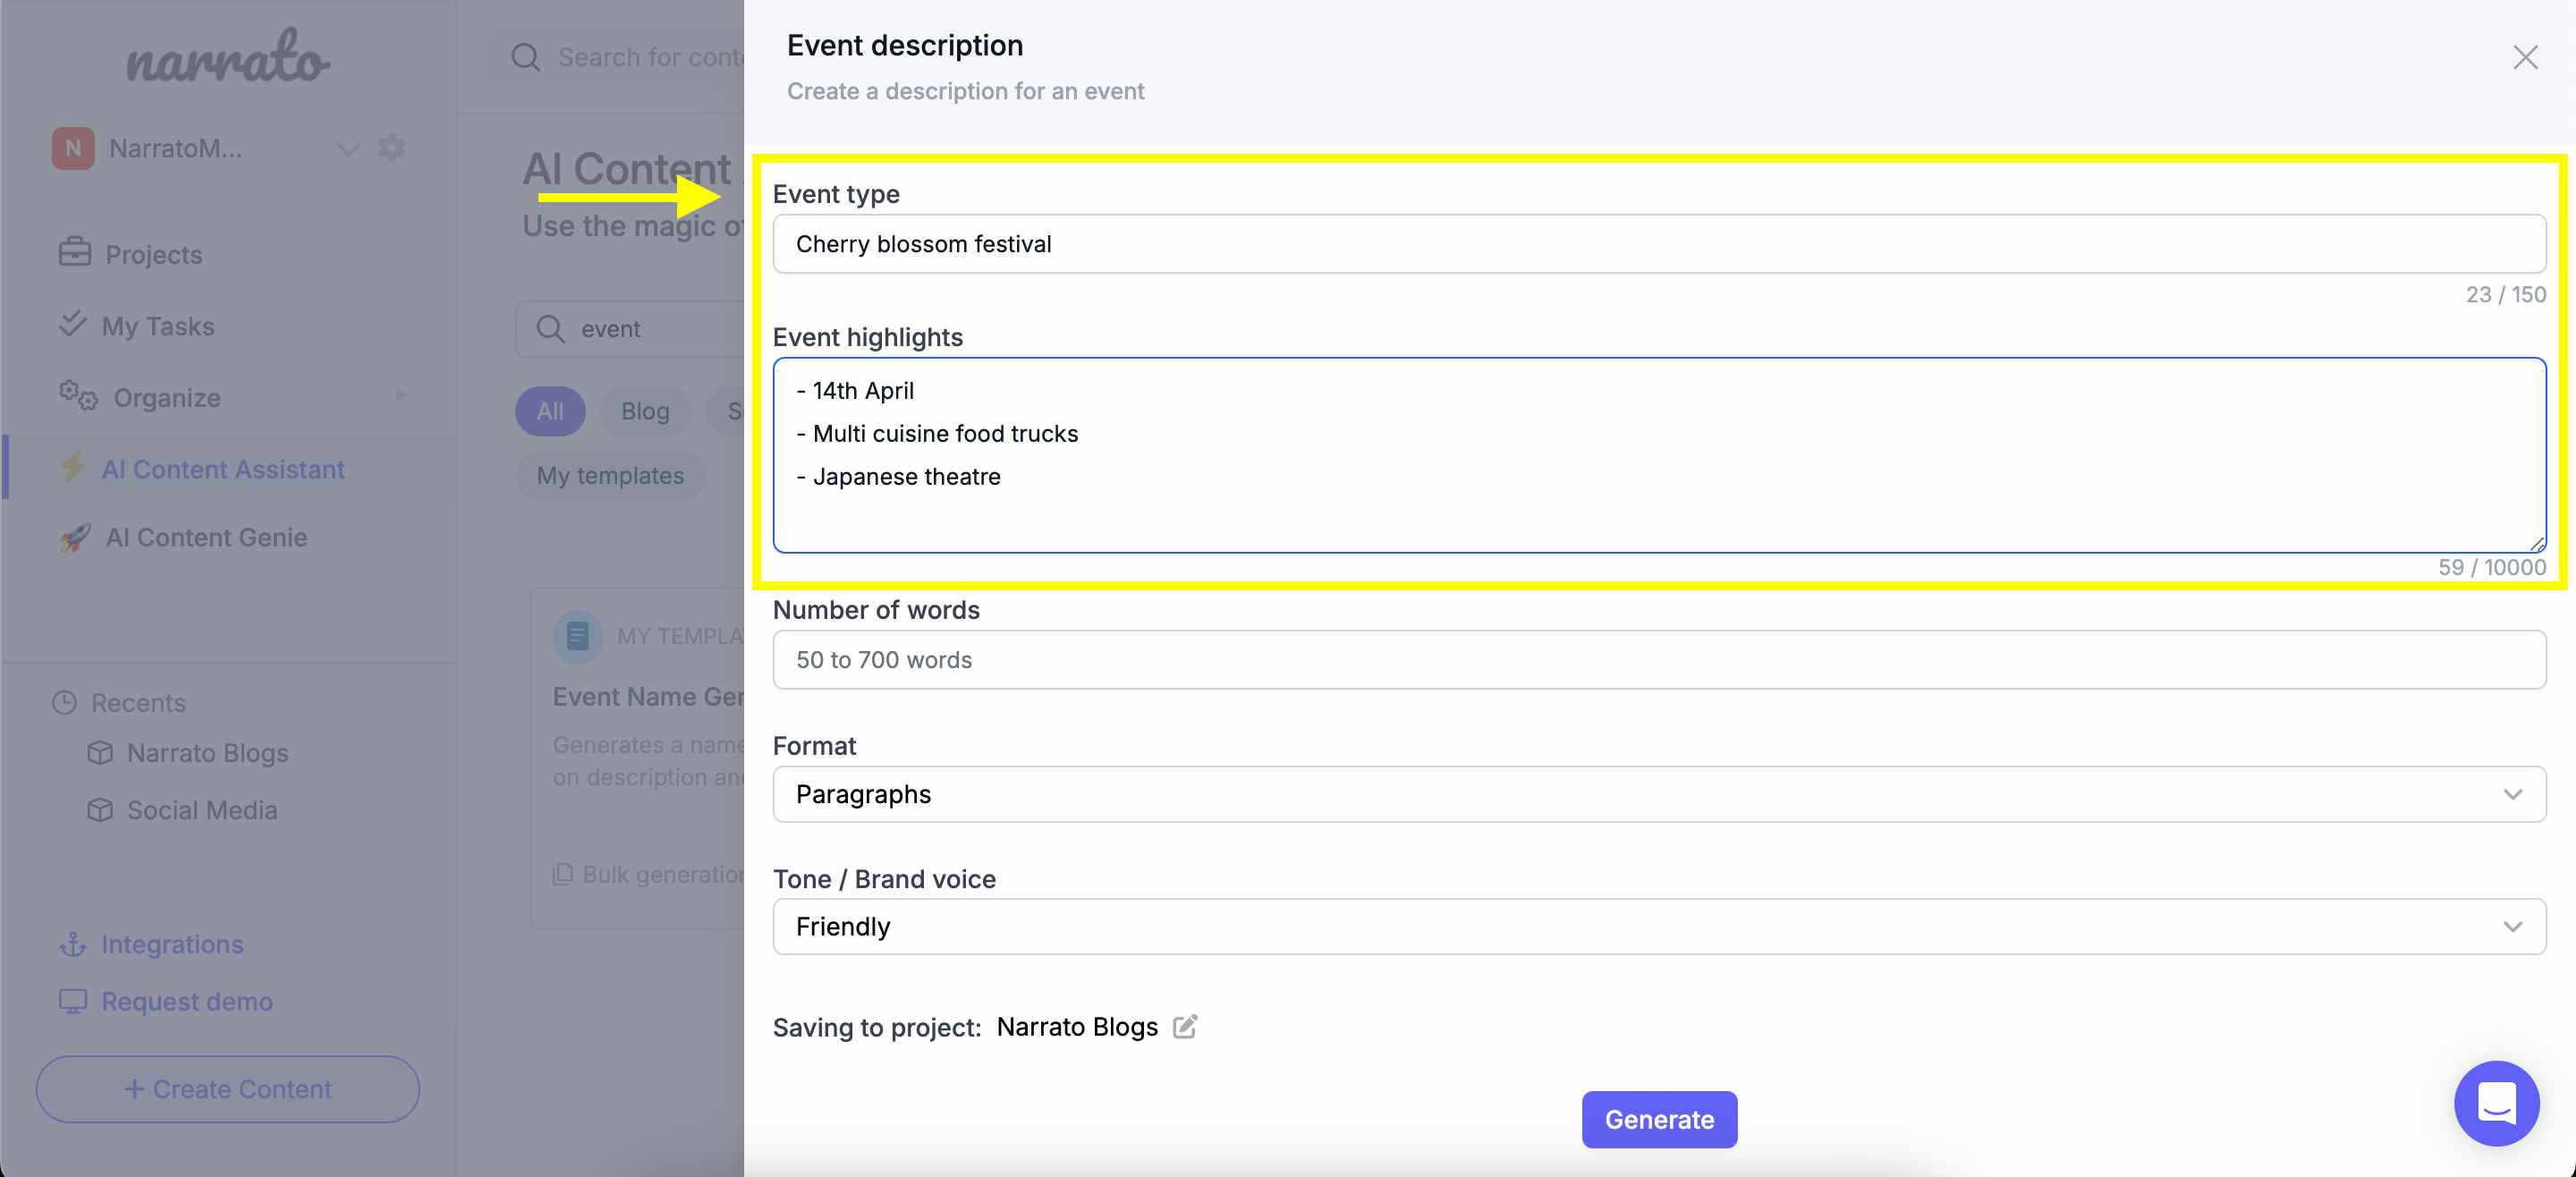 Specifying event details in the AI event description generator